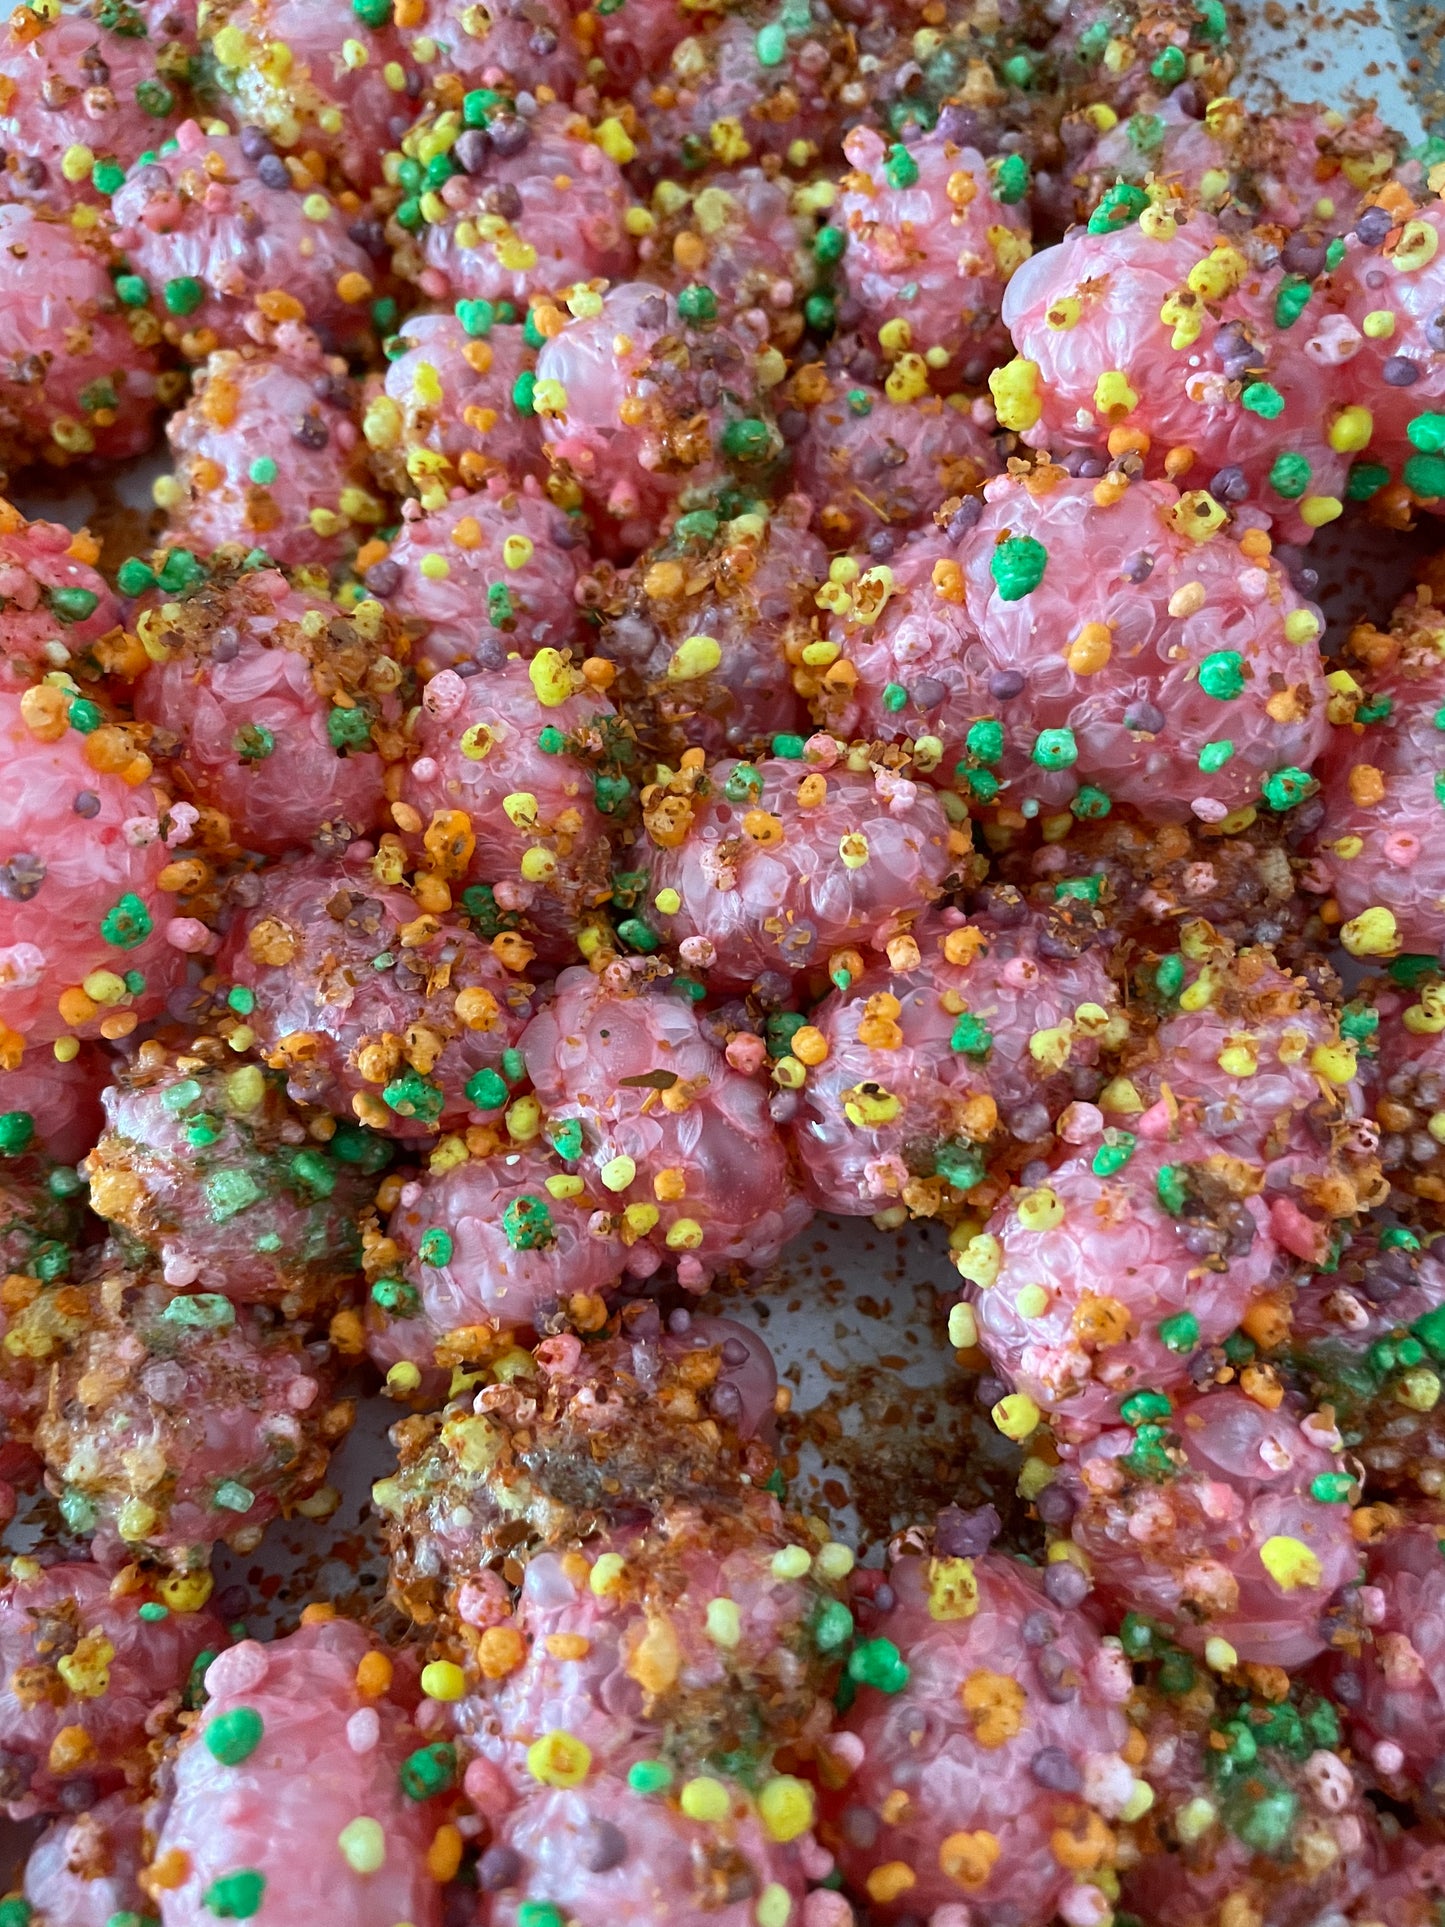 Nerd Chewy Clusters